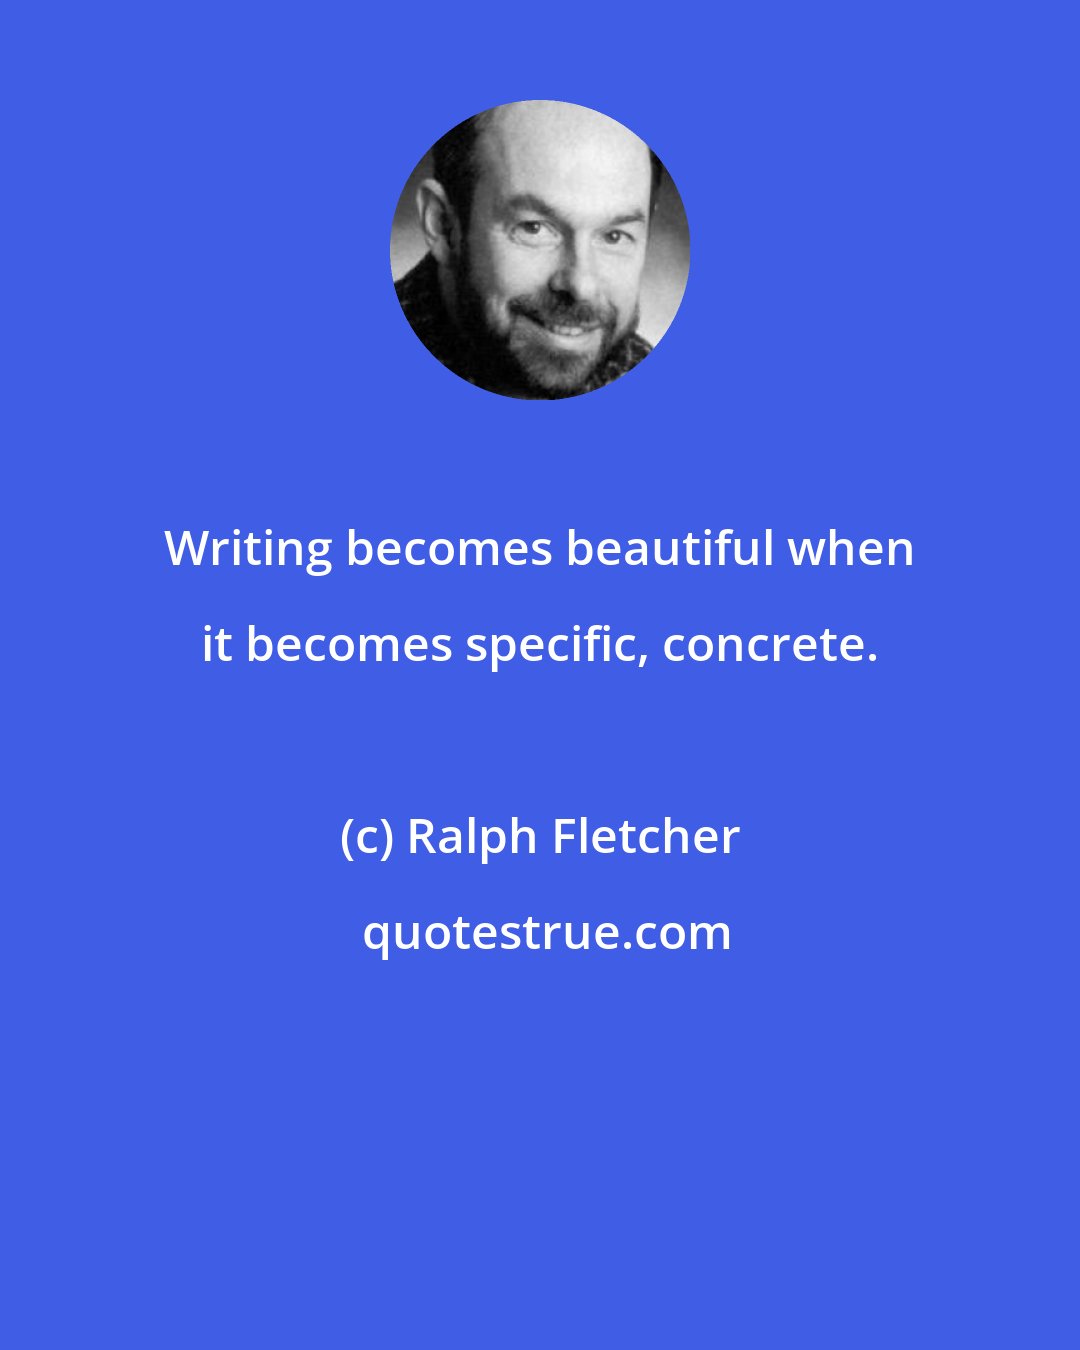 Ralph Fletcher: Writing becomes beautiful when it becomes specific, concrete.